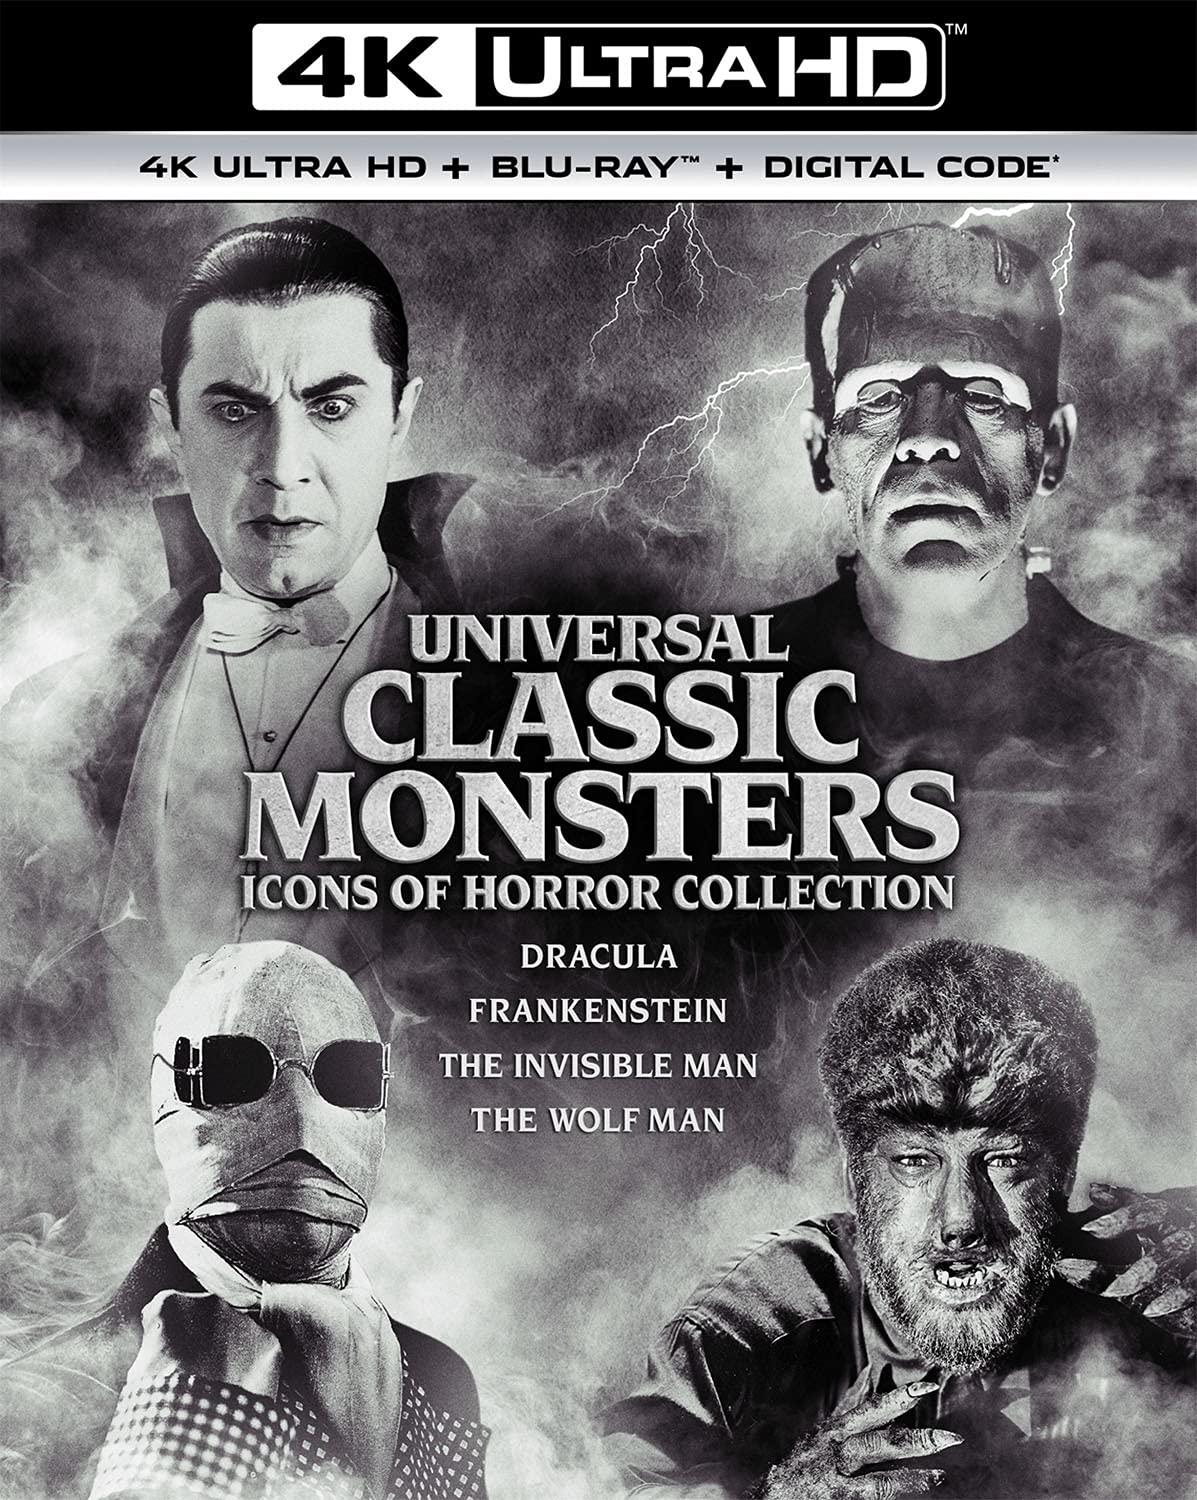 Universal Classic Monsters: Icons of Horror Collection [4K UHD] $29.99